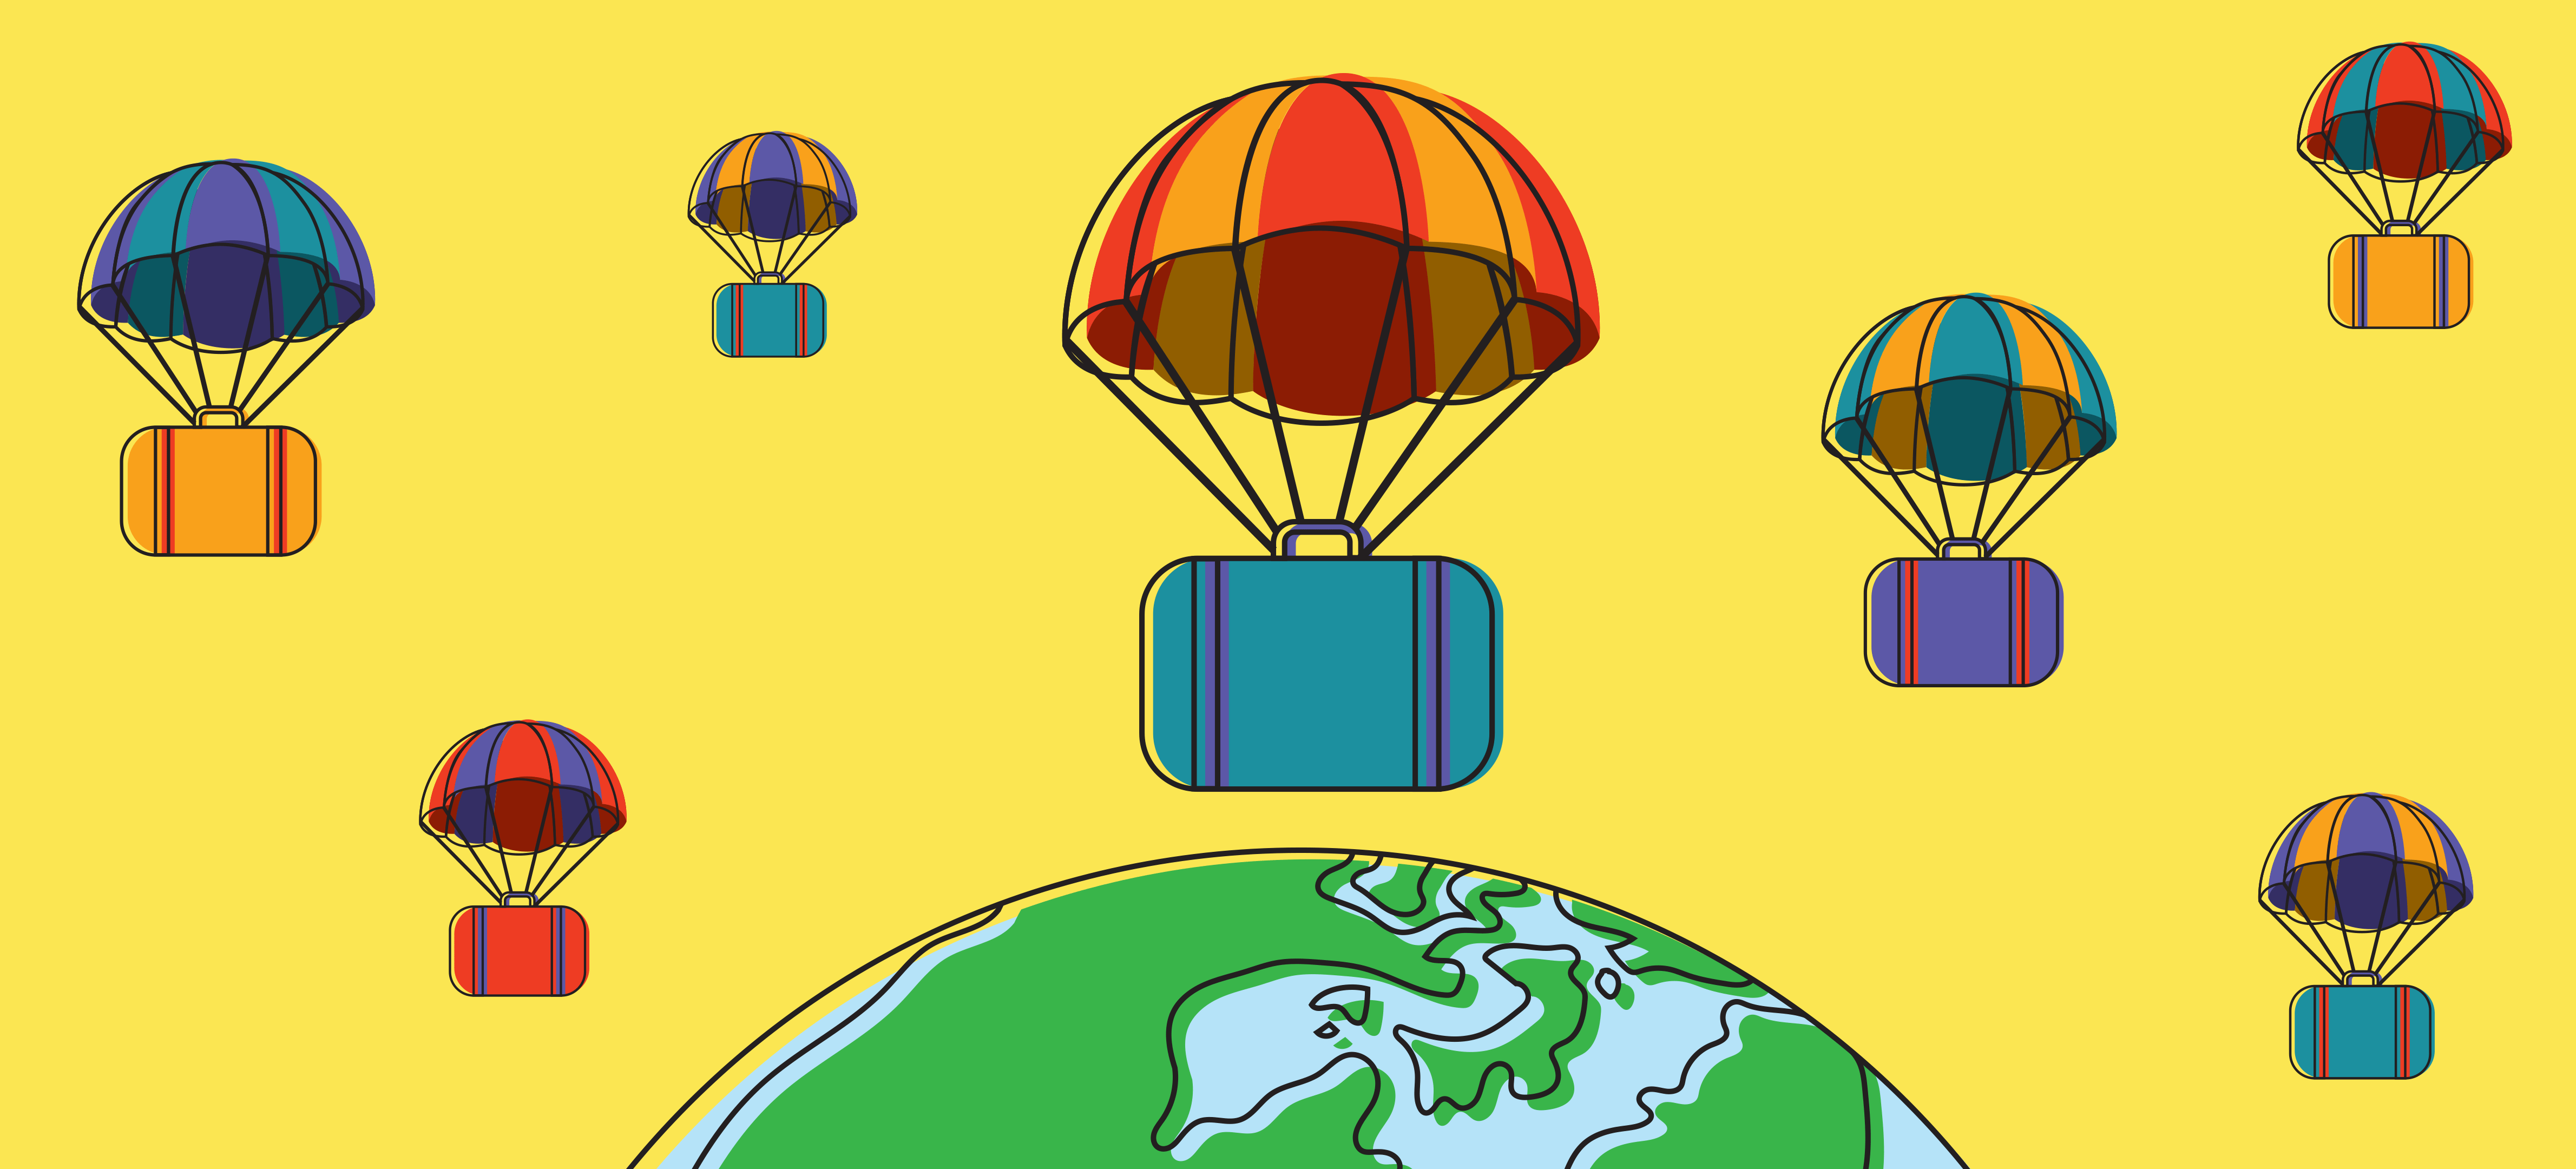 Several pieces of luggage parachuting high over the earth